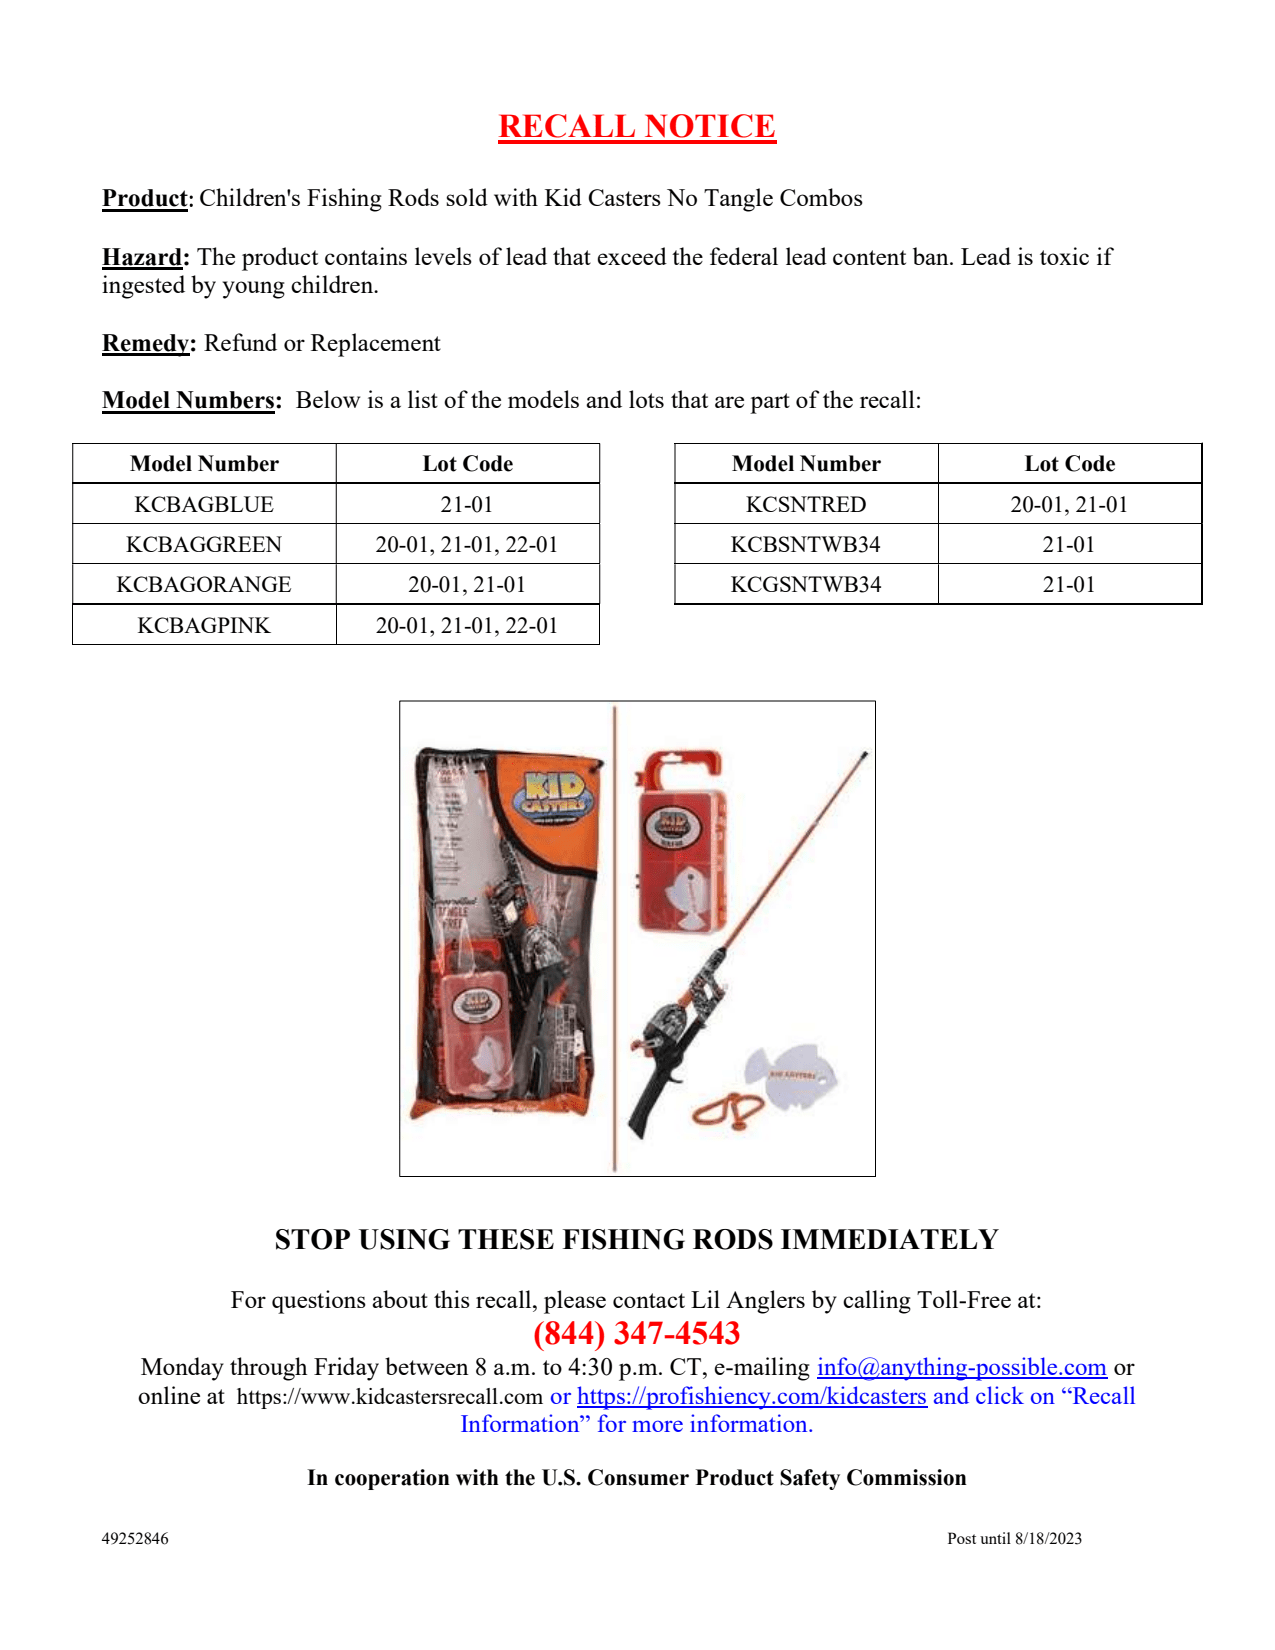 PRODUCT RECALL NOTICE